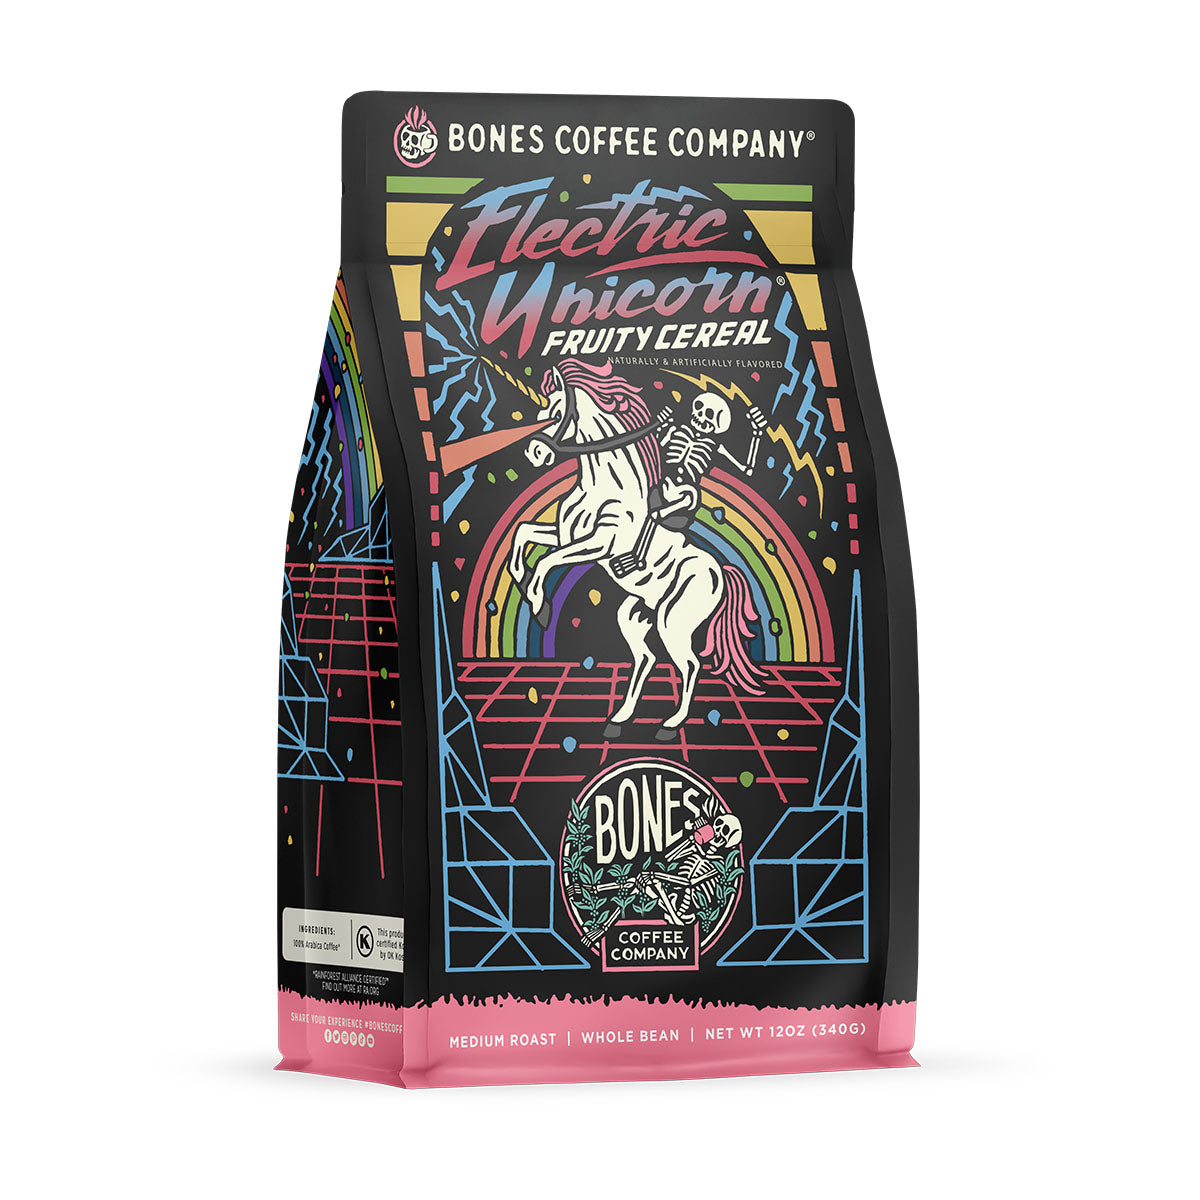 The front of a 12 ounce bag of Bones Coffee Company Electric Unicorn coffee. Its flavor is fruity cereal, and it has a skeleton riding a unicorn in front of a rainbow on the art.